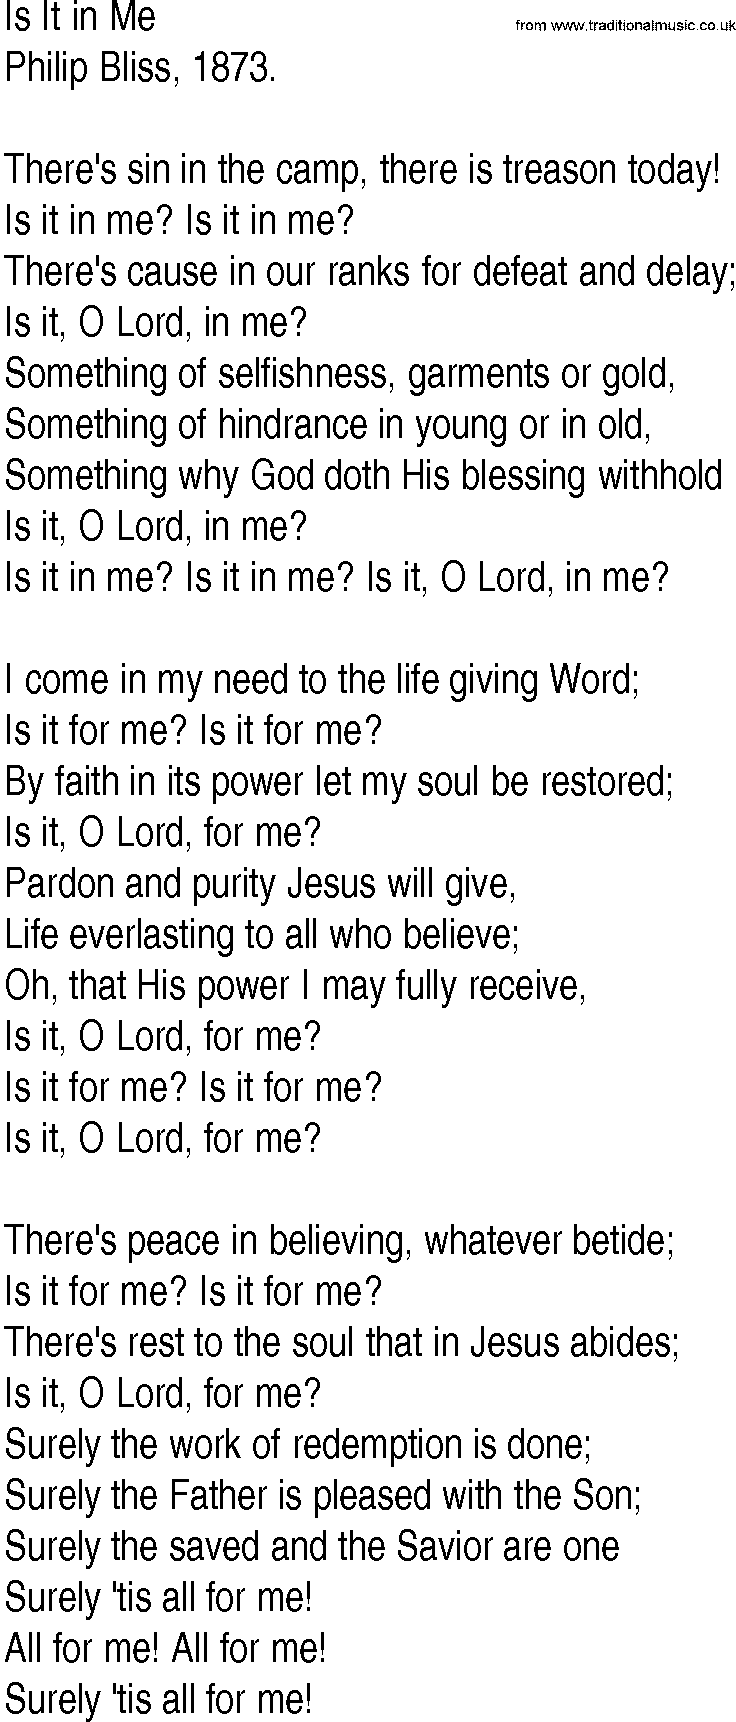 Hymn and Gospel Song: Is It in Me by Philip Bliss lyrics